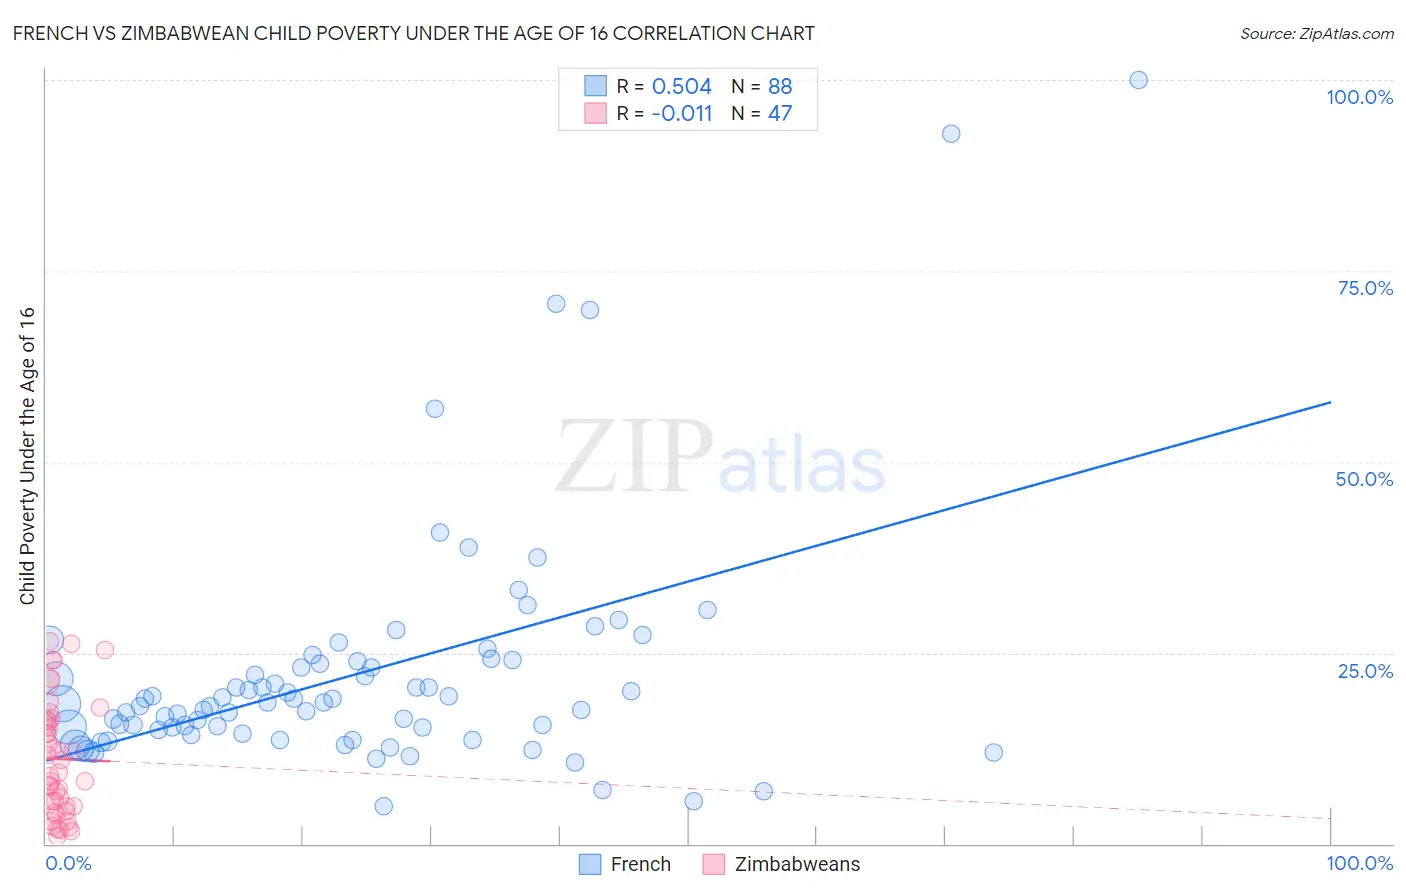 French vs Zimbabwean Child Poverty Under the Age of 16